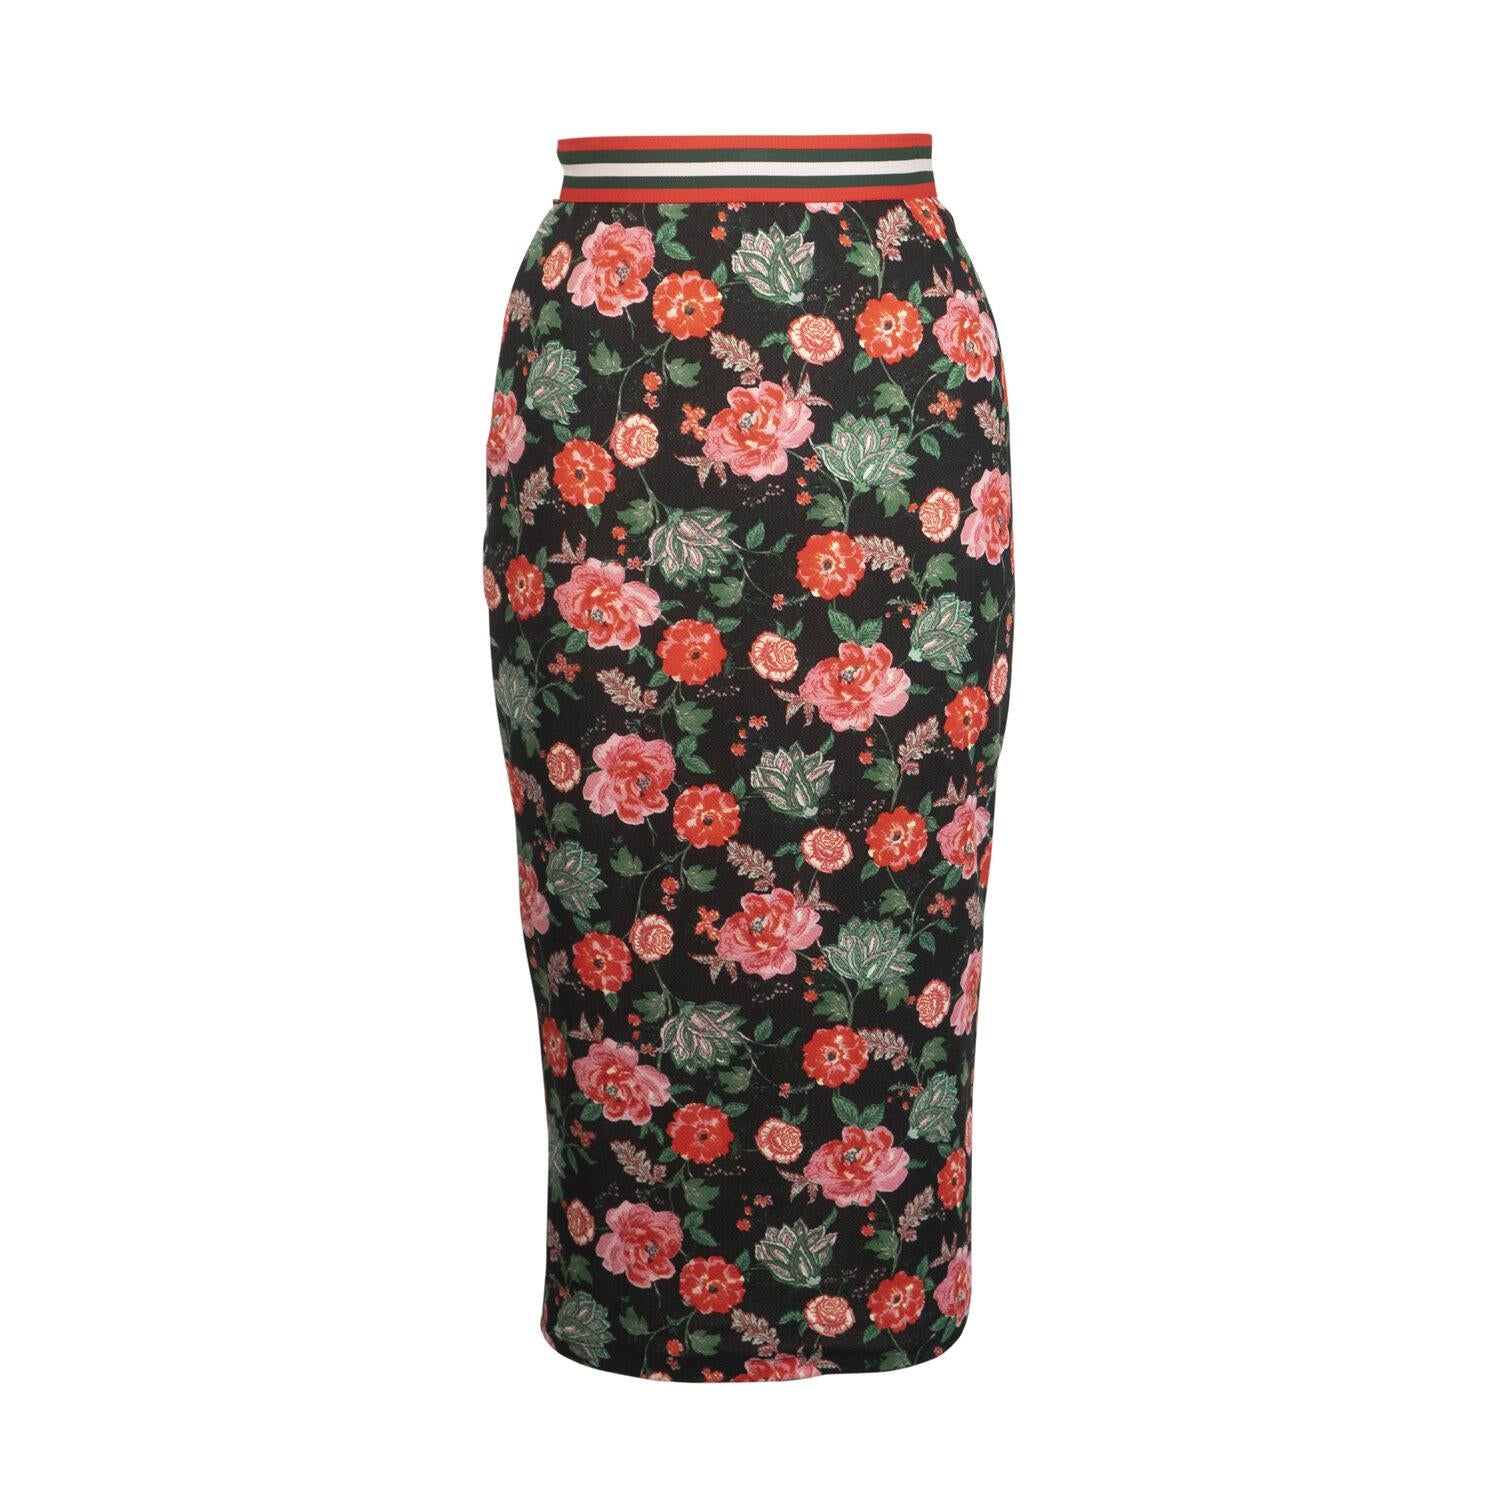 Black midi pencil skirt with floral print featuring shades of pink, red, and green. The waist is accented with a thick, red, green, and white striped elastic waistband and the hem sits below the knee in length. Bold vintage inspired romantic bohemian style.